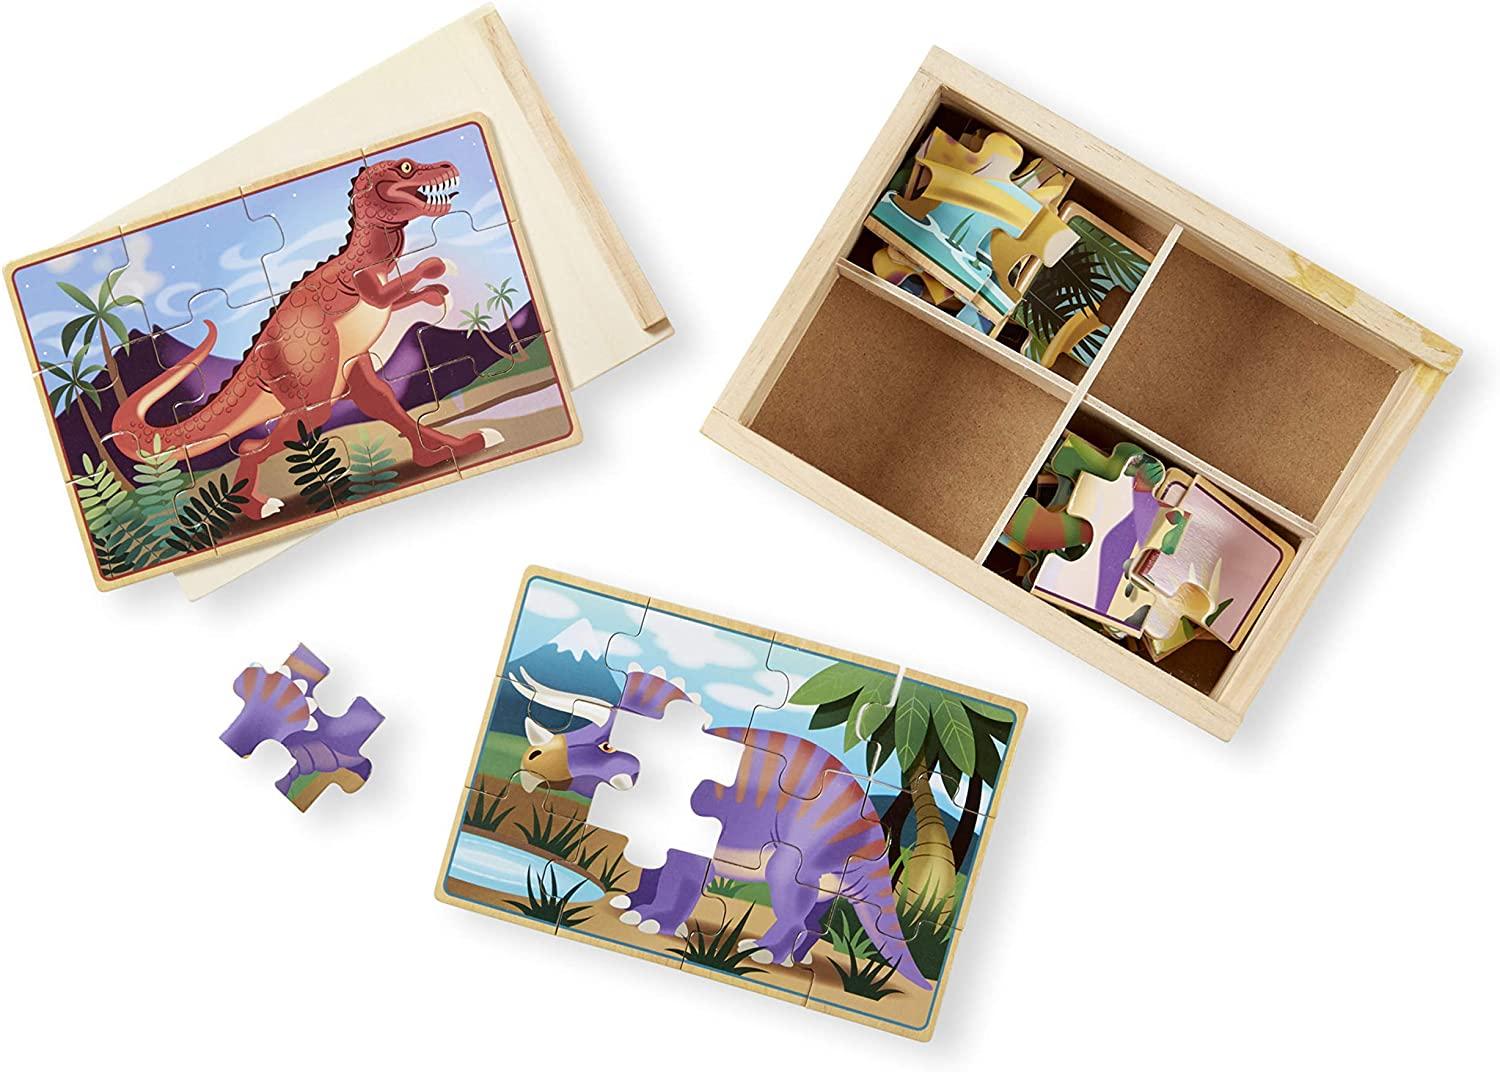 Melissa and Doug 4-in-1 Wooden Jigsaw Puzzles for $6.97